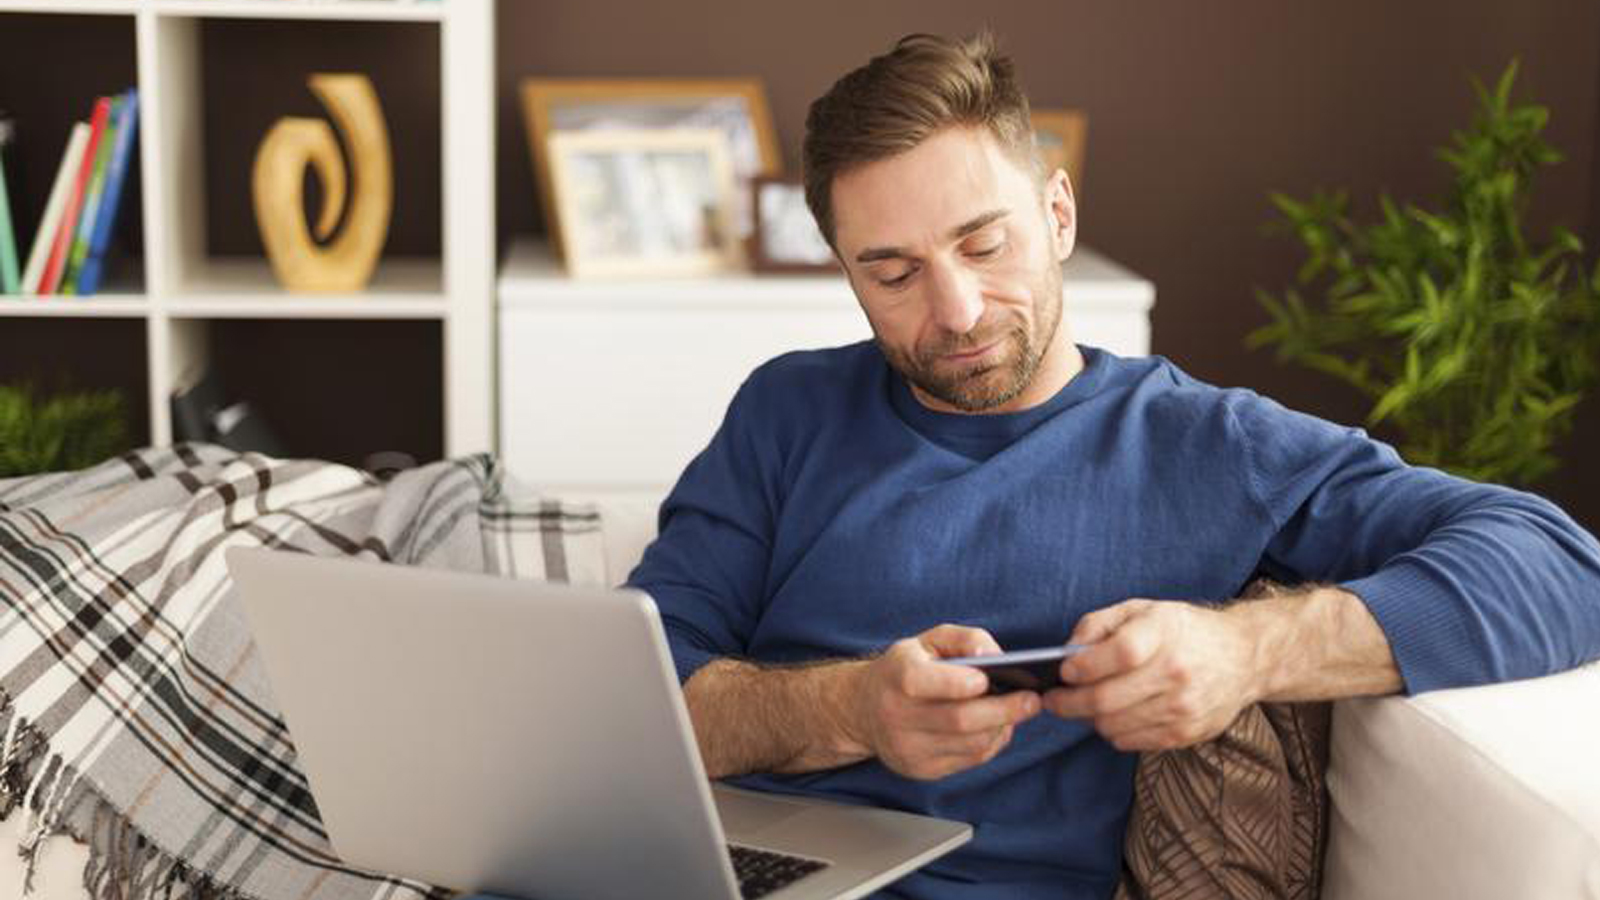 A man sitting on a sofa looking at his mobile phone with a laptop open in front of him.